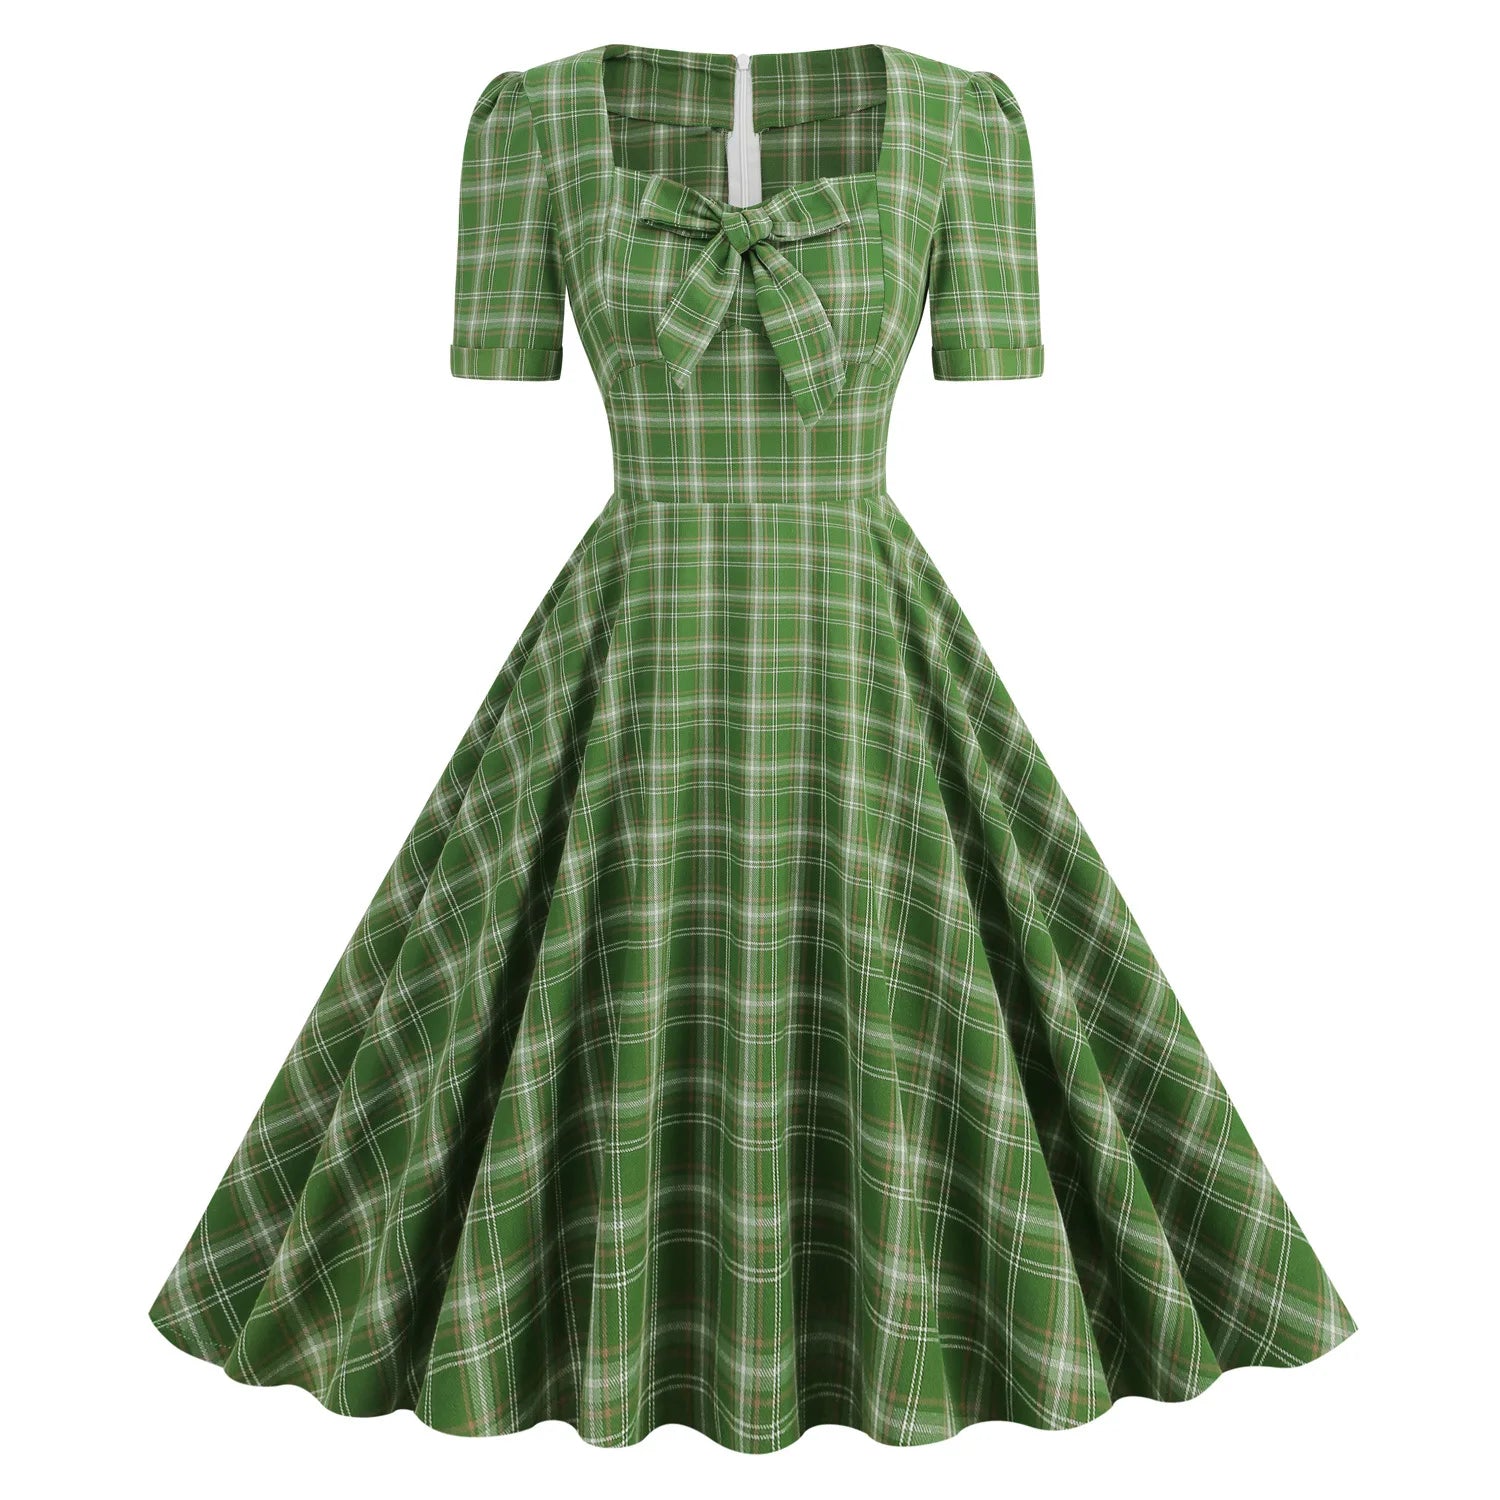 England Style Casual Vintage Short Sleeve Square Neck Bow 50s Pinup Swing Dress